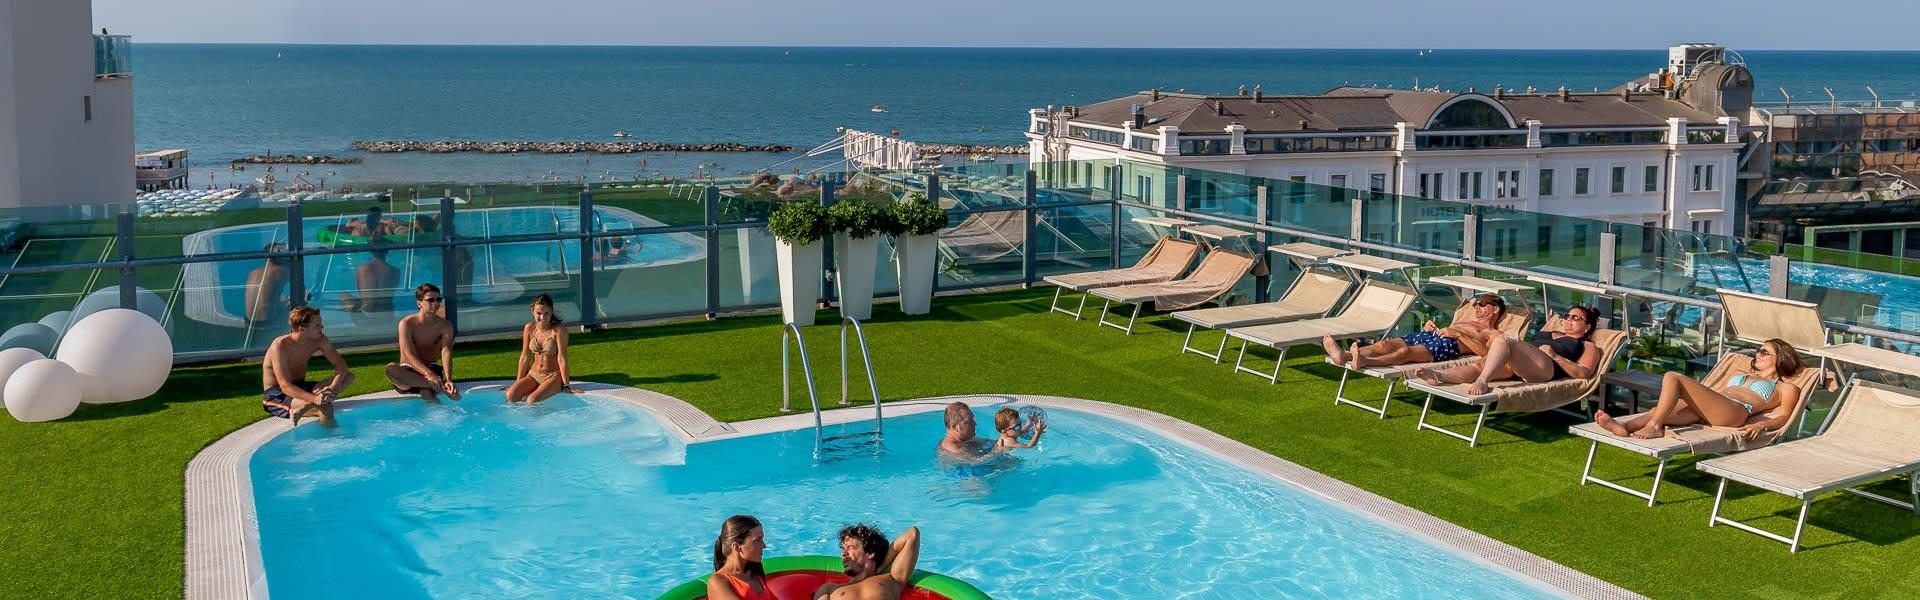 hotelsanmarcocattolica fr offre-speciale-reservez-en-avance-hotel-cattolica 003